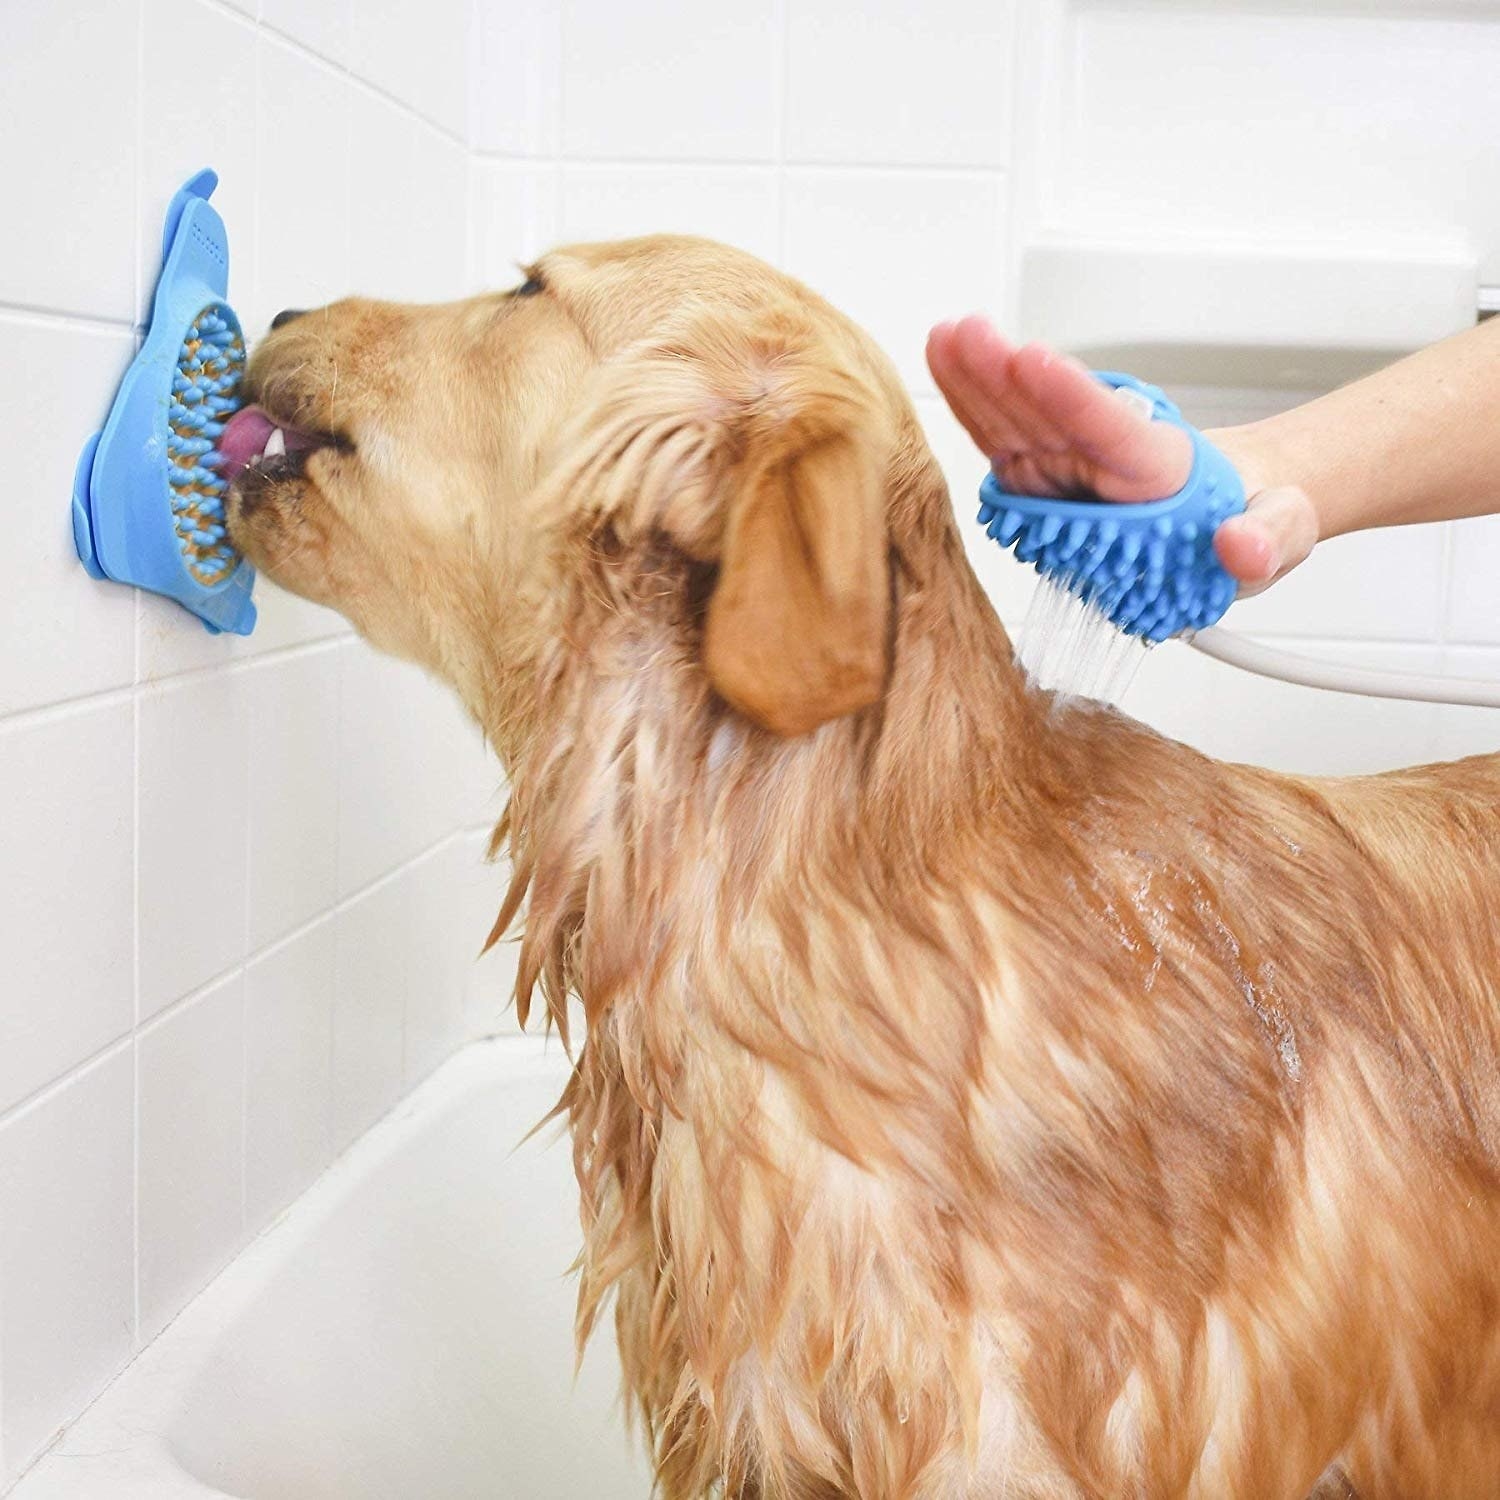 A labrador licks peanut butter off an Aquapaw Slow Treater Silicone Lick Mat while someone bathes him in the shower